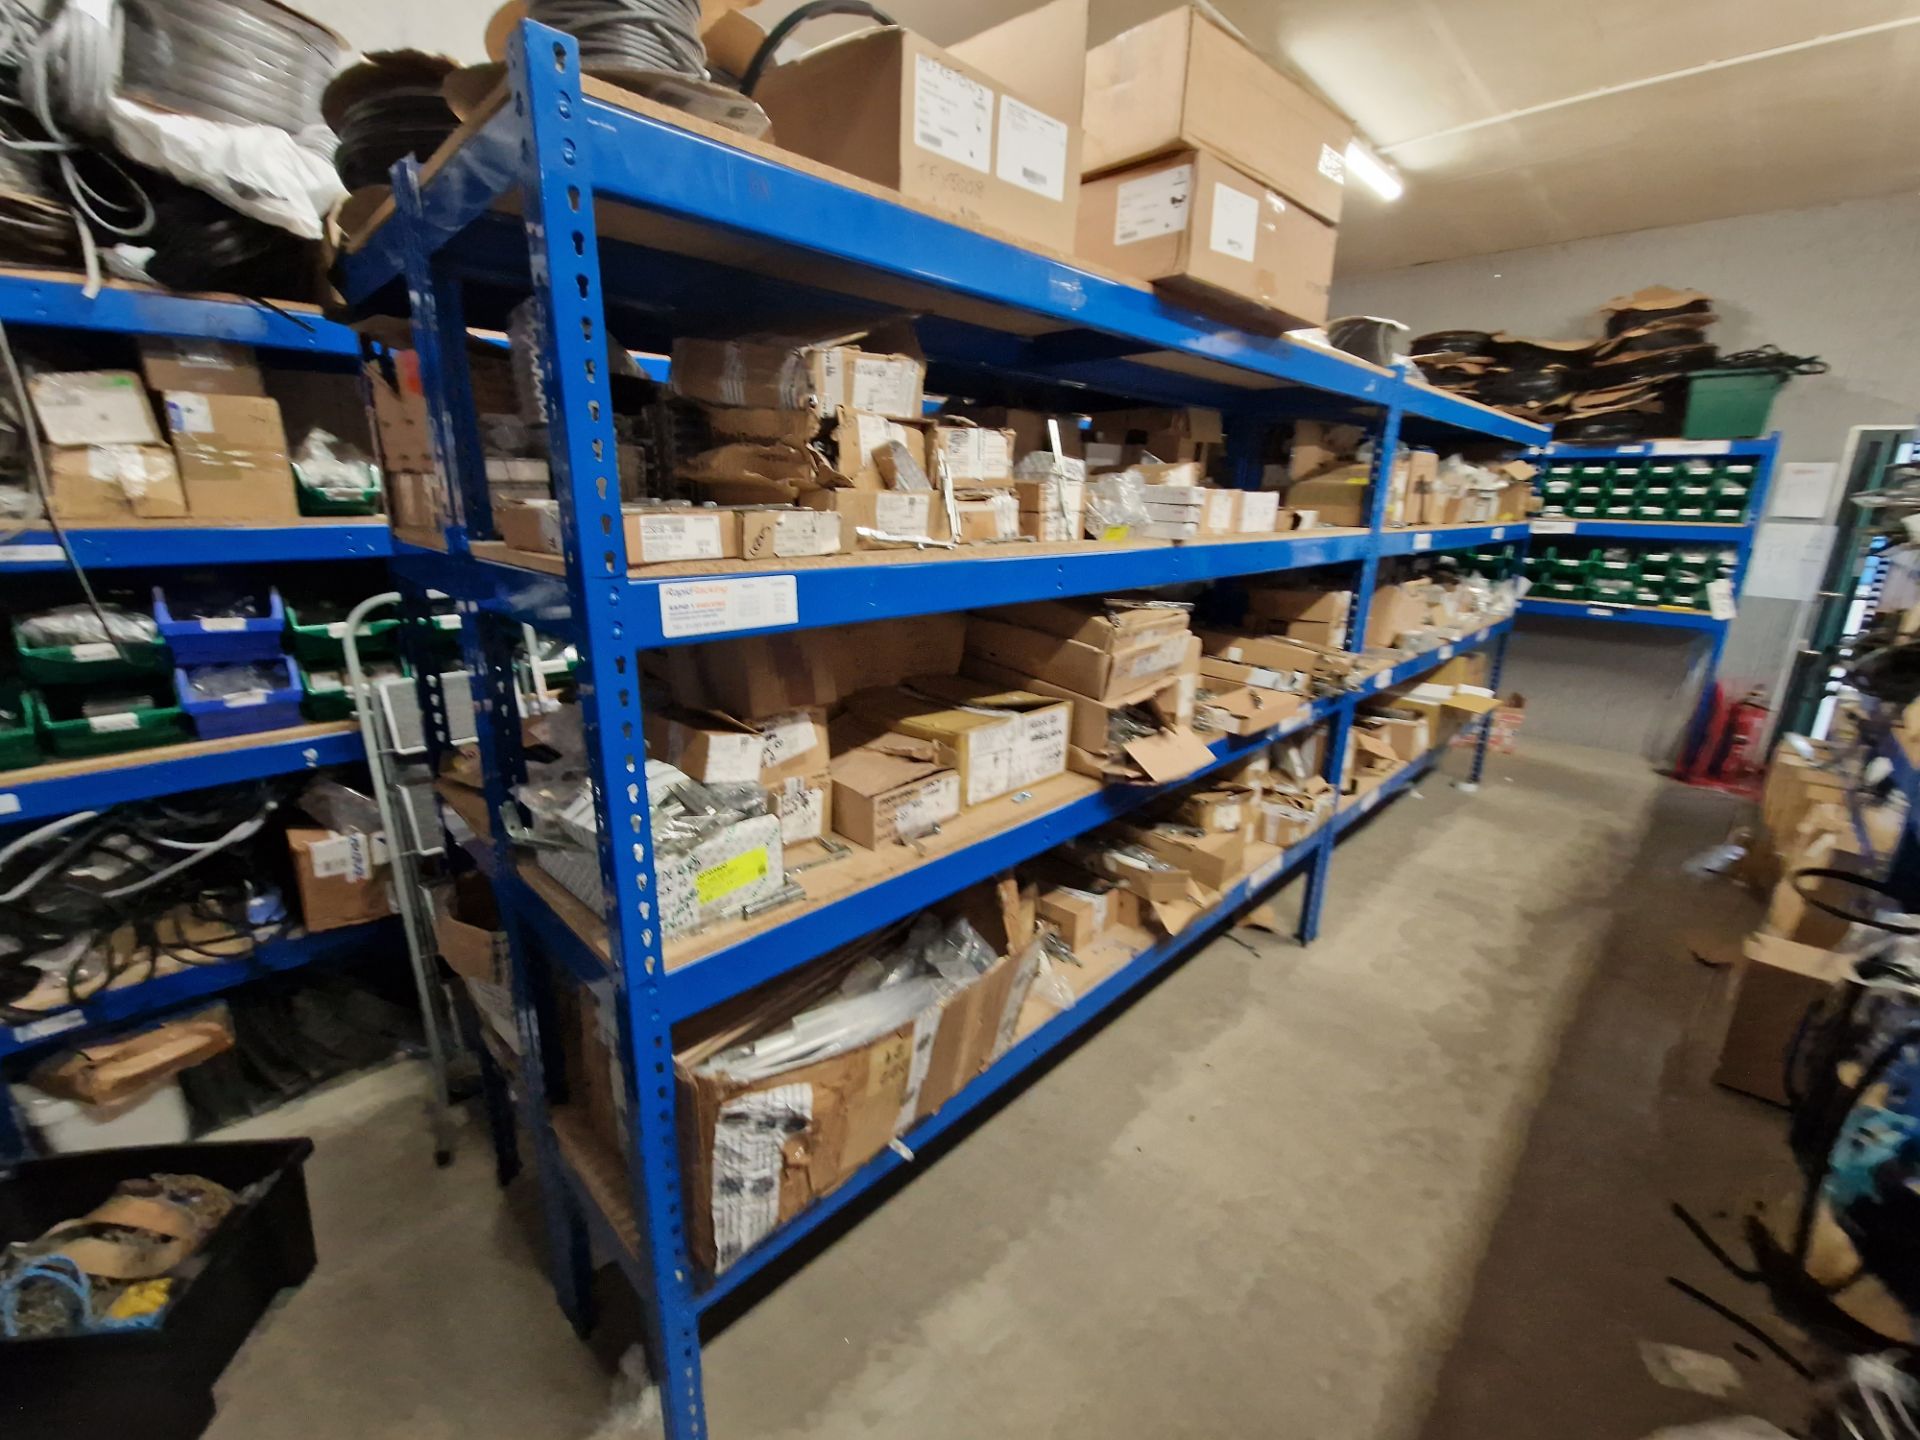 Contents to Four Bays of Shelving, including Rubber Gaskets, Aluminium Profile, End Caps, Screws,